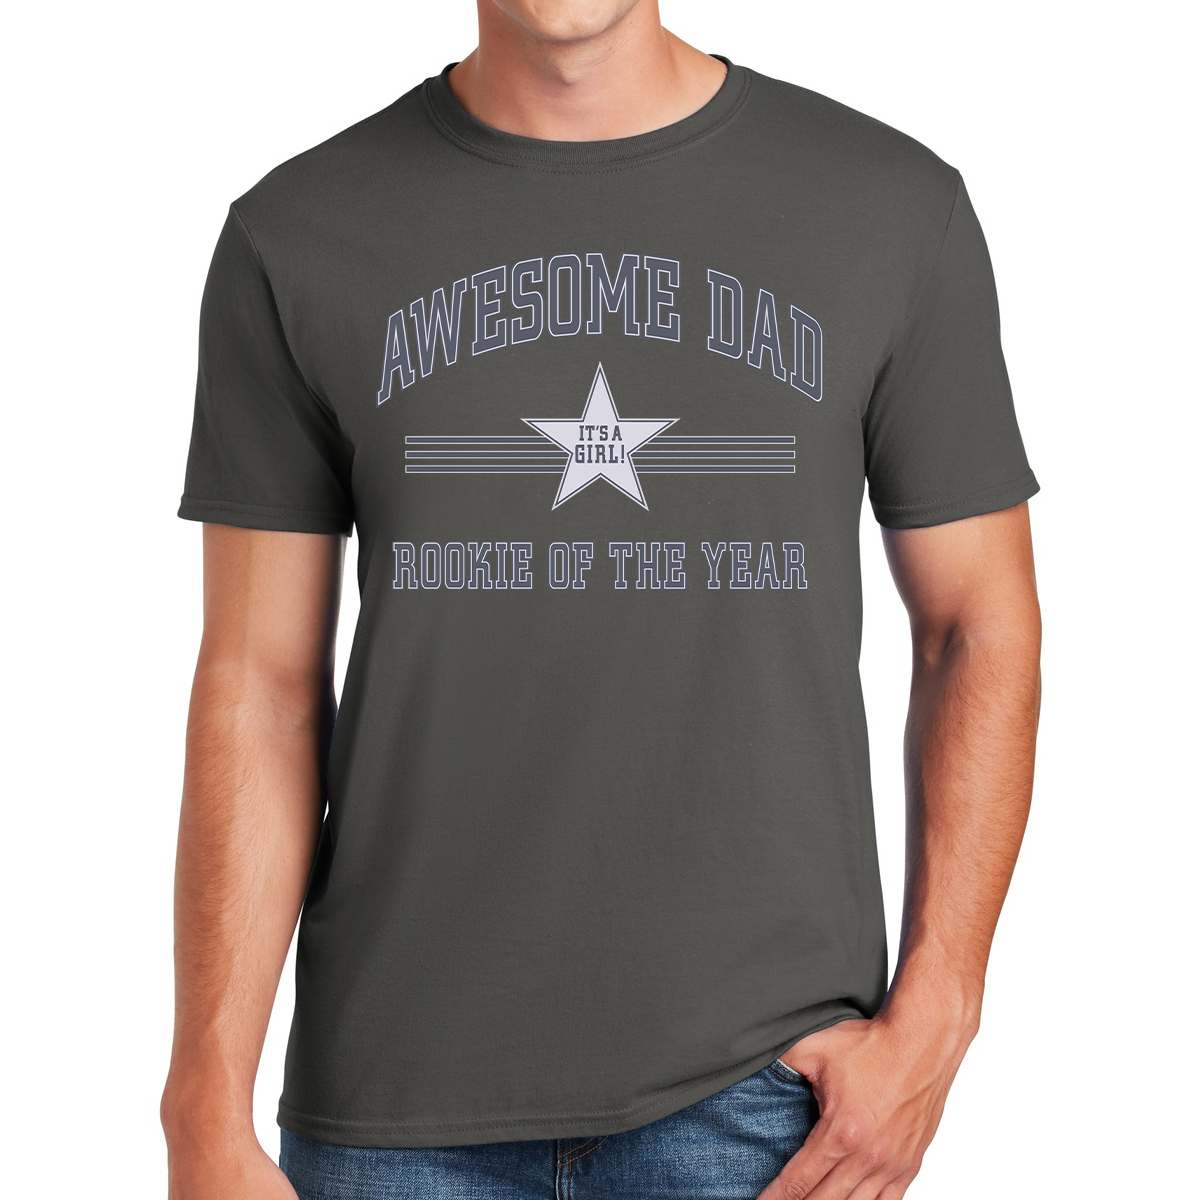 Awesome Dad Rookie Of The Year It's A Girl Welcoming Our Little Princess Gift For Dads T-shirt